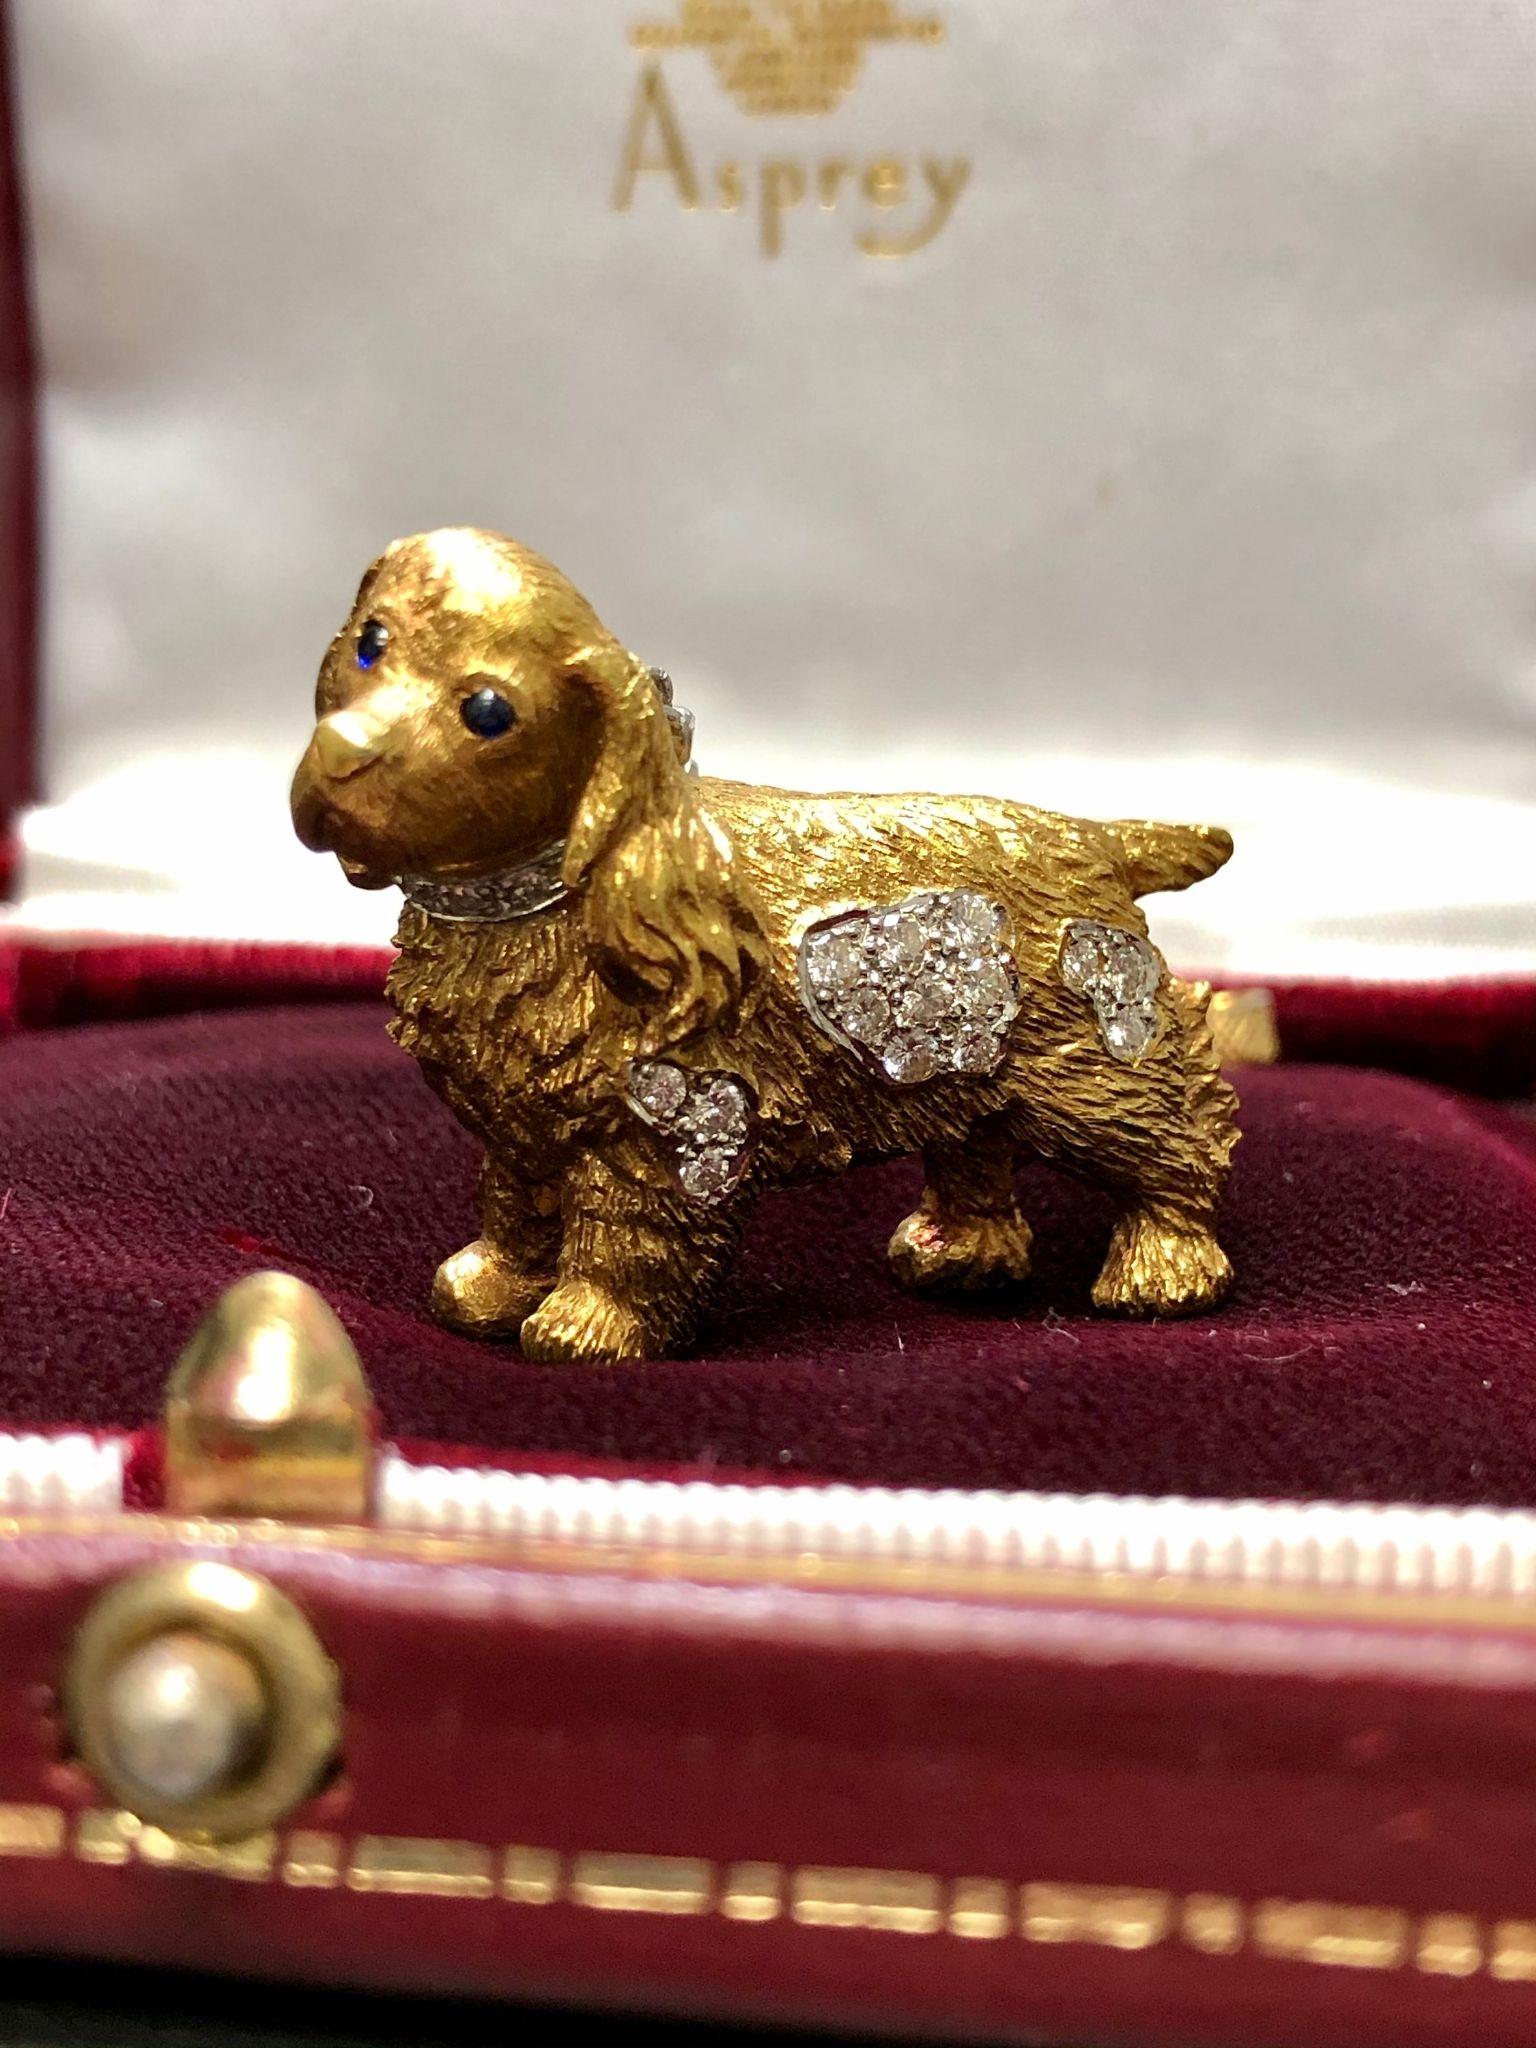 Circa 1970’s, this Asprey of London spaniel pin is so well done. Complete with platinum and diamond lead, sapphire eyes and diamond body, this beautifully made piece has two pin-clasp closures with one being on the spaniel and one on the handle of